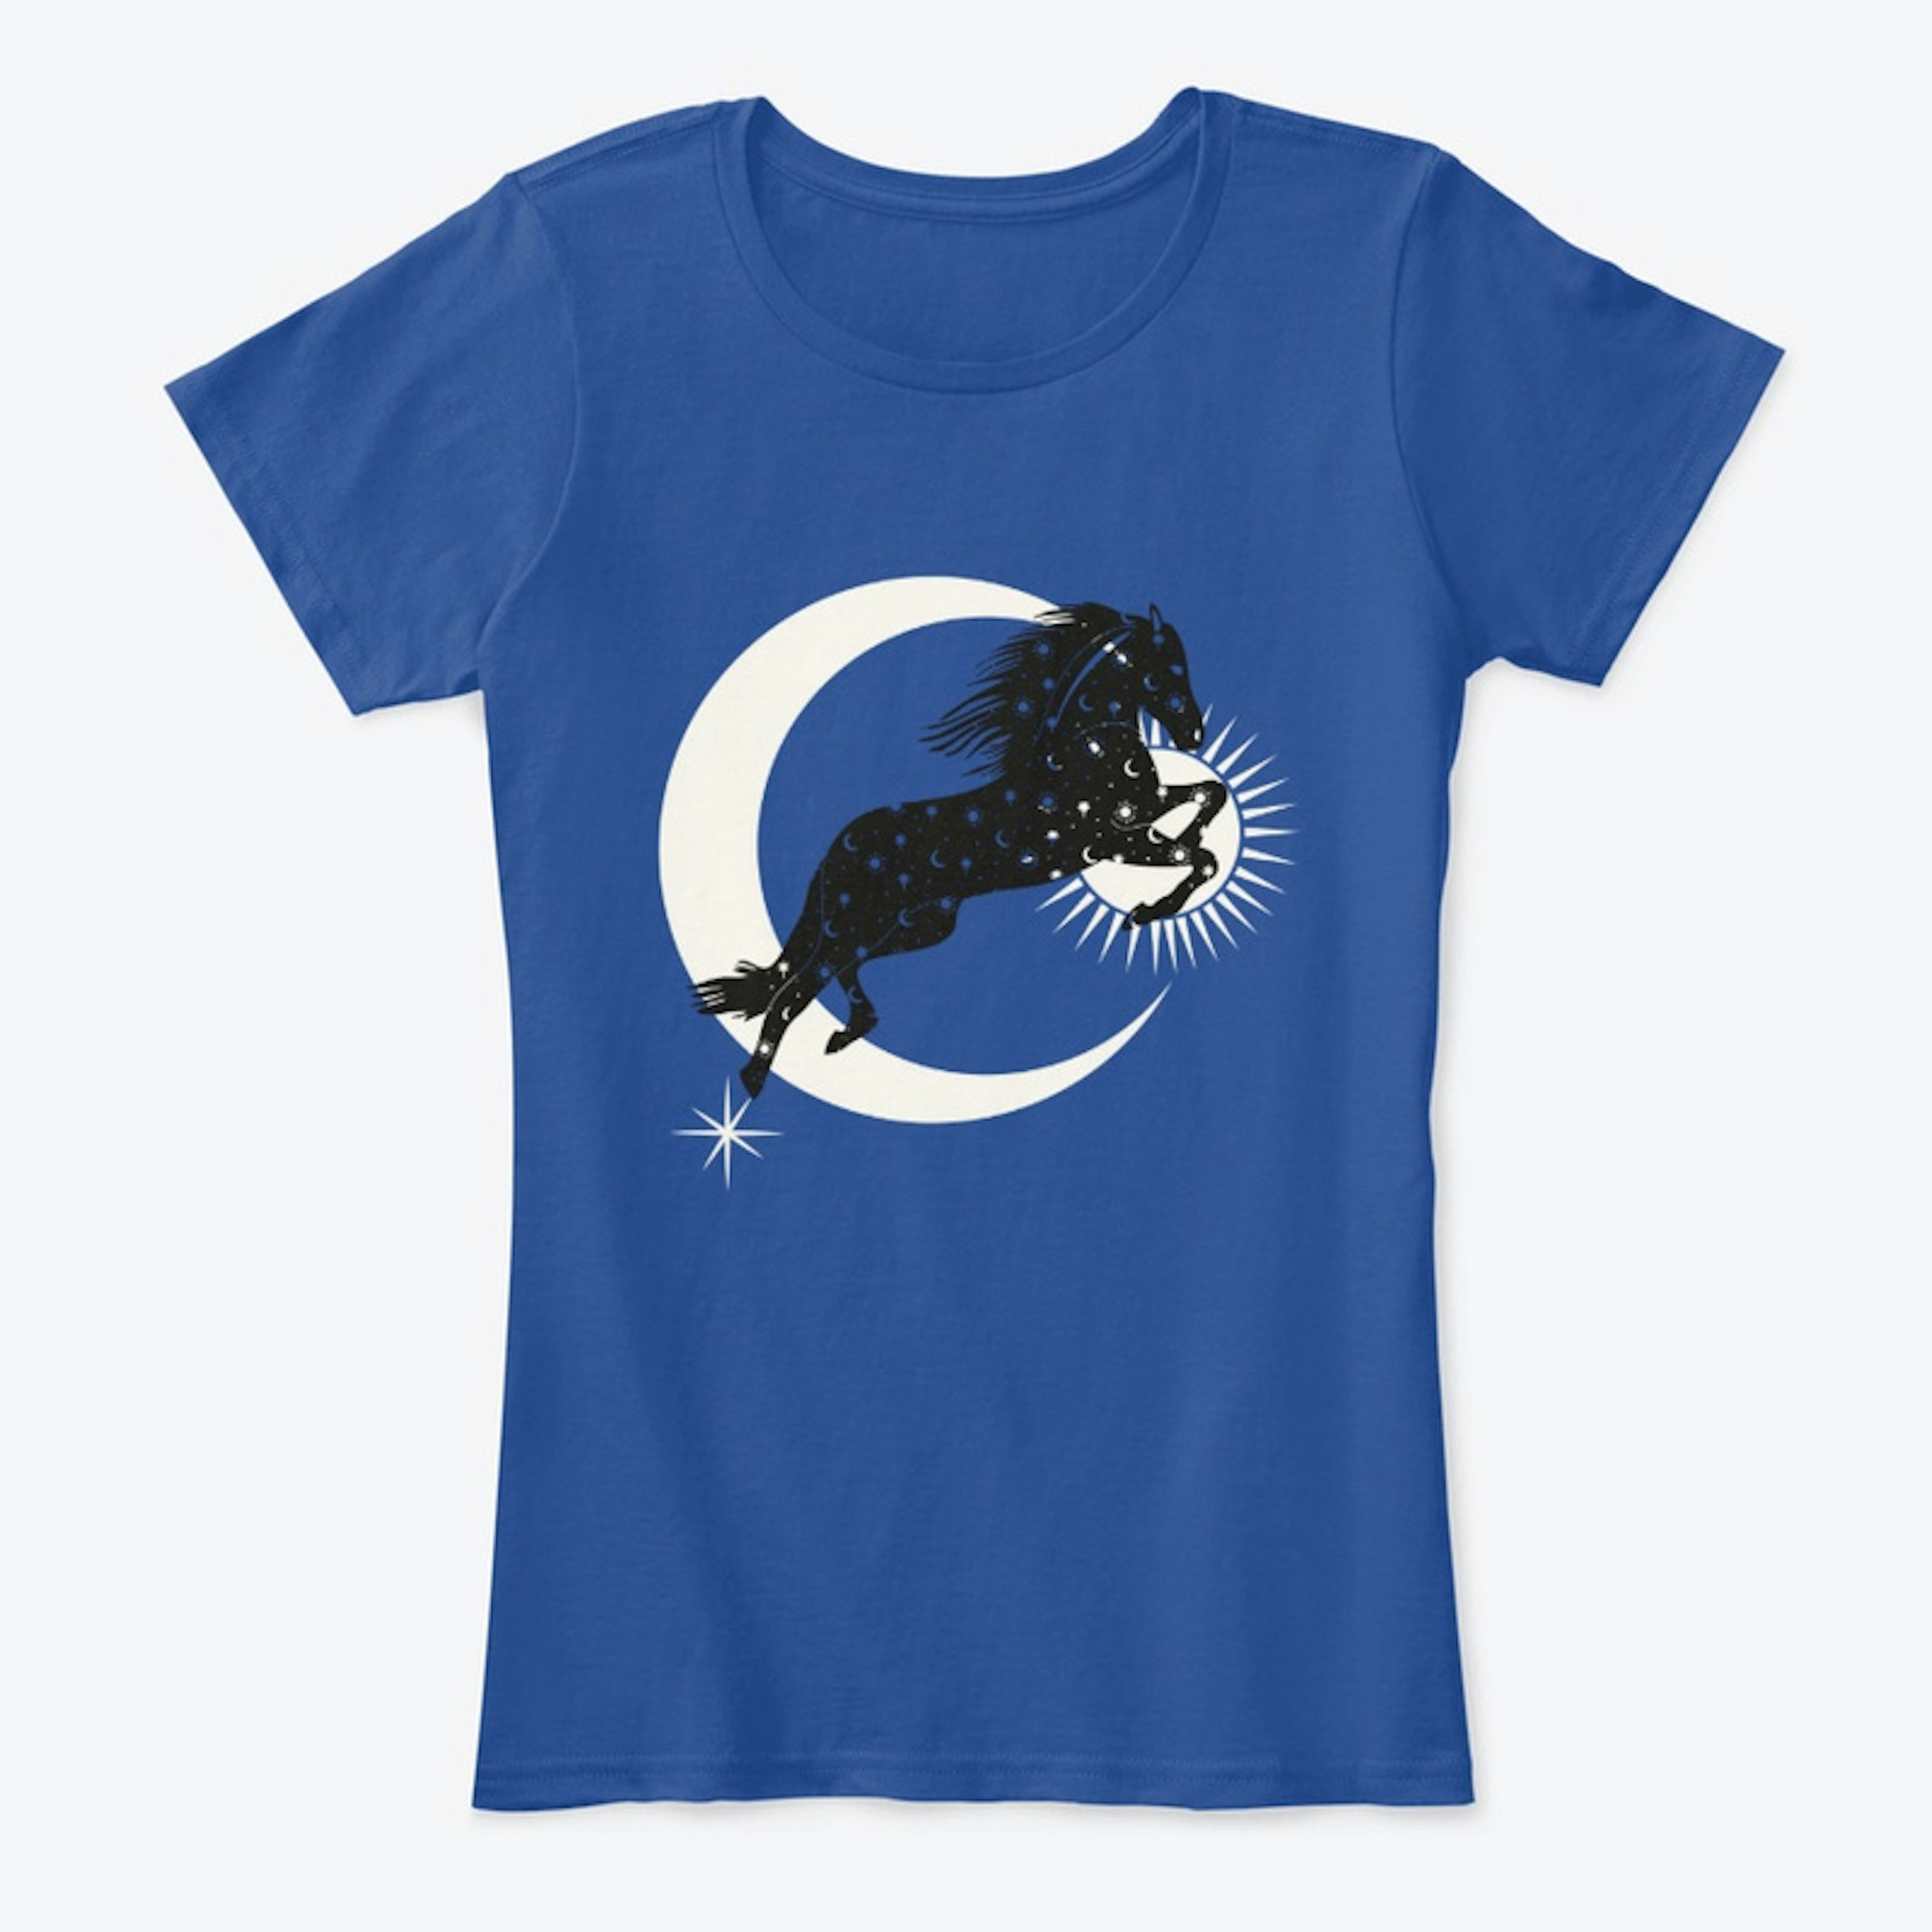 Ride The Galaxy Horse Graphic T-Shirt